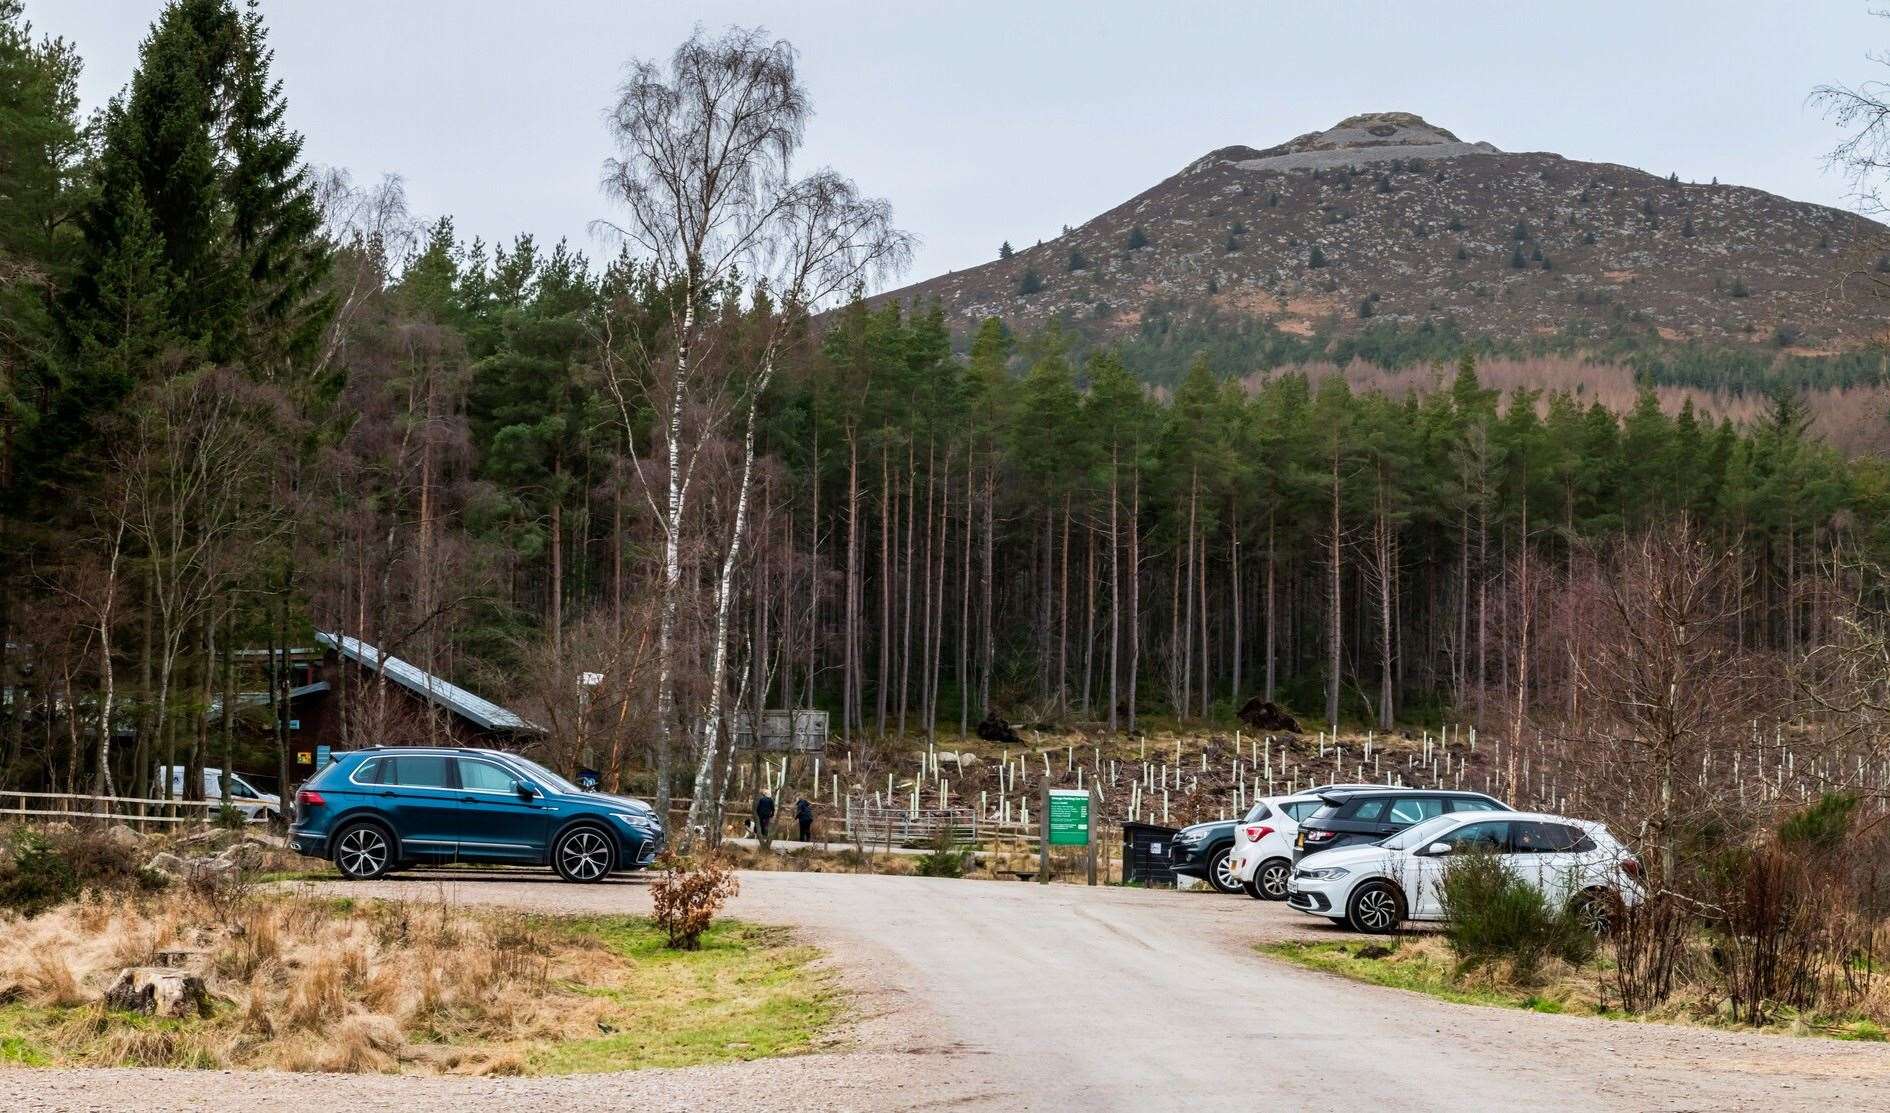 The centre acts as a base for those exploring the hillside in Aberdeenshire.